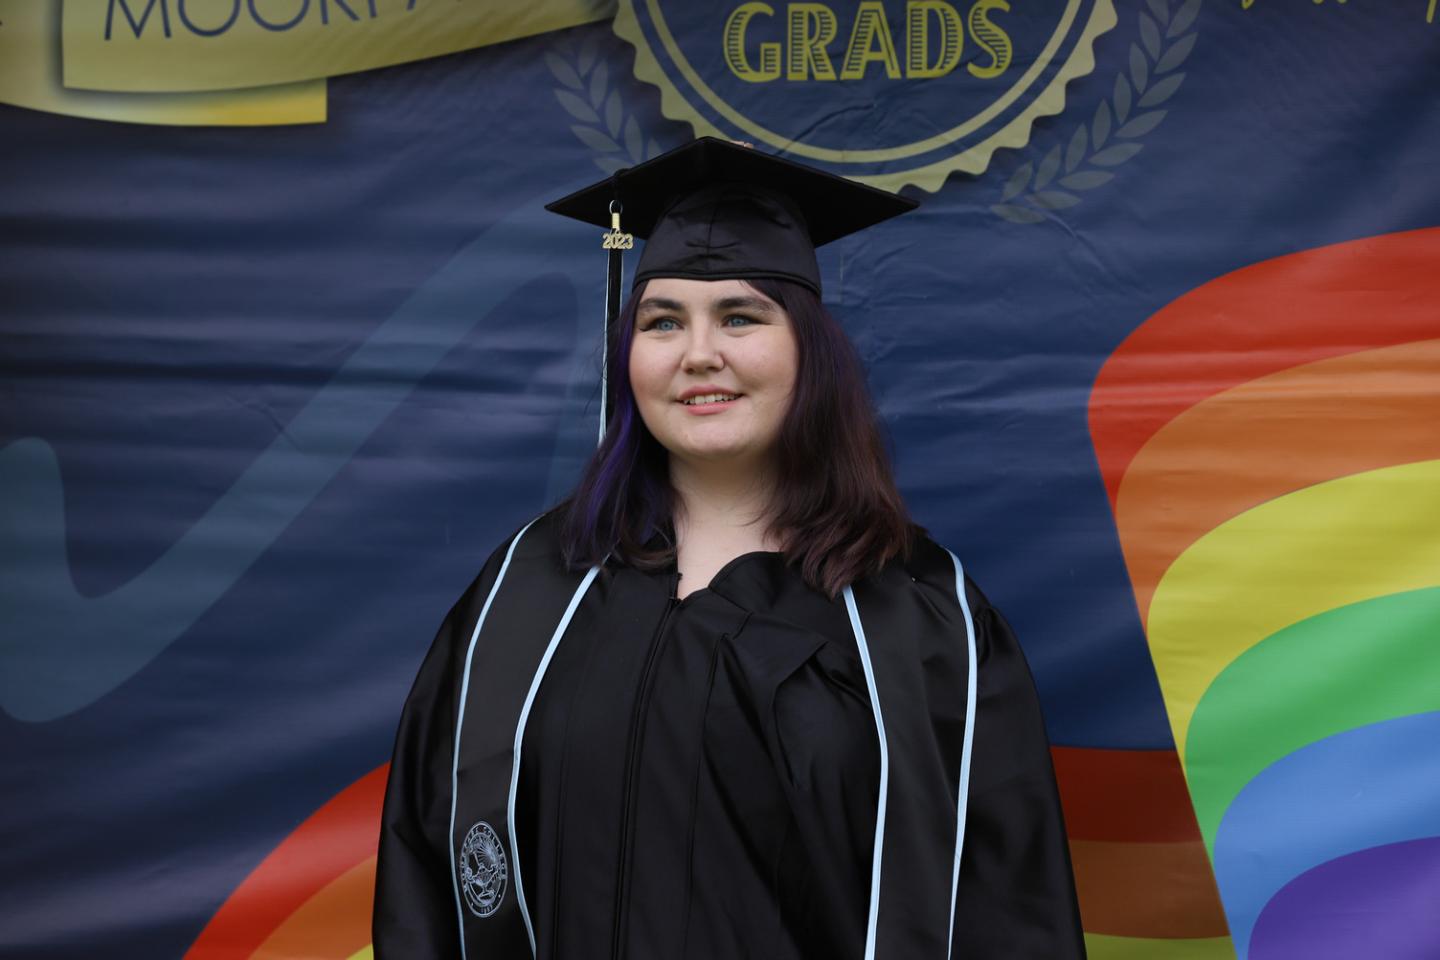 A graduate in regalia is shown smiling for a picture